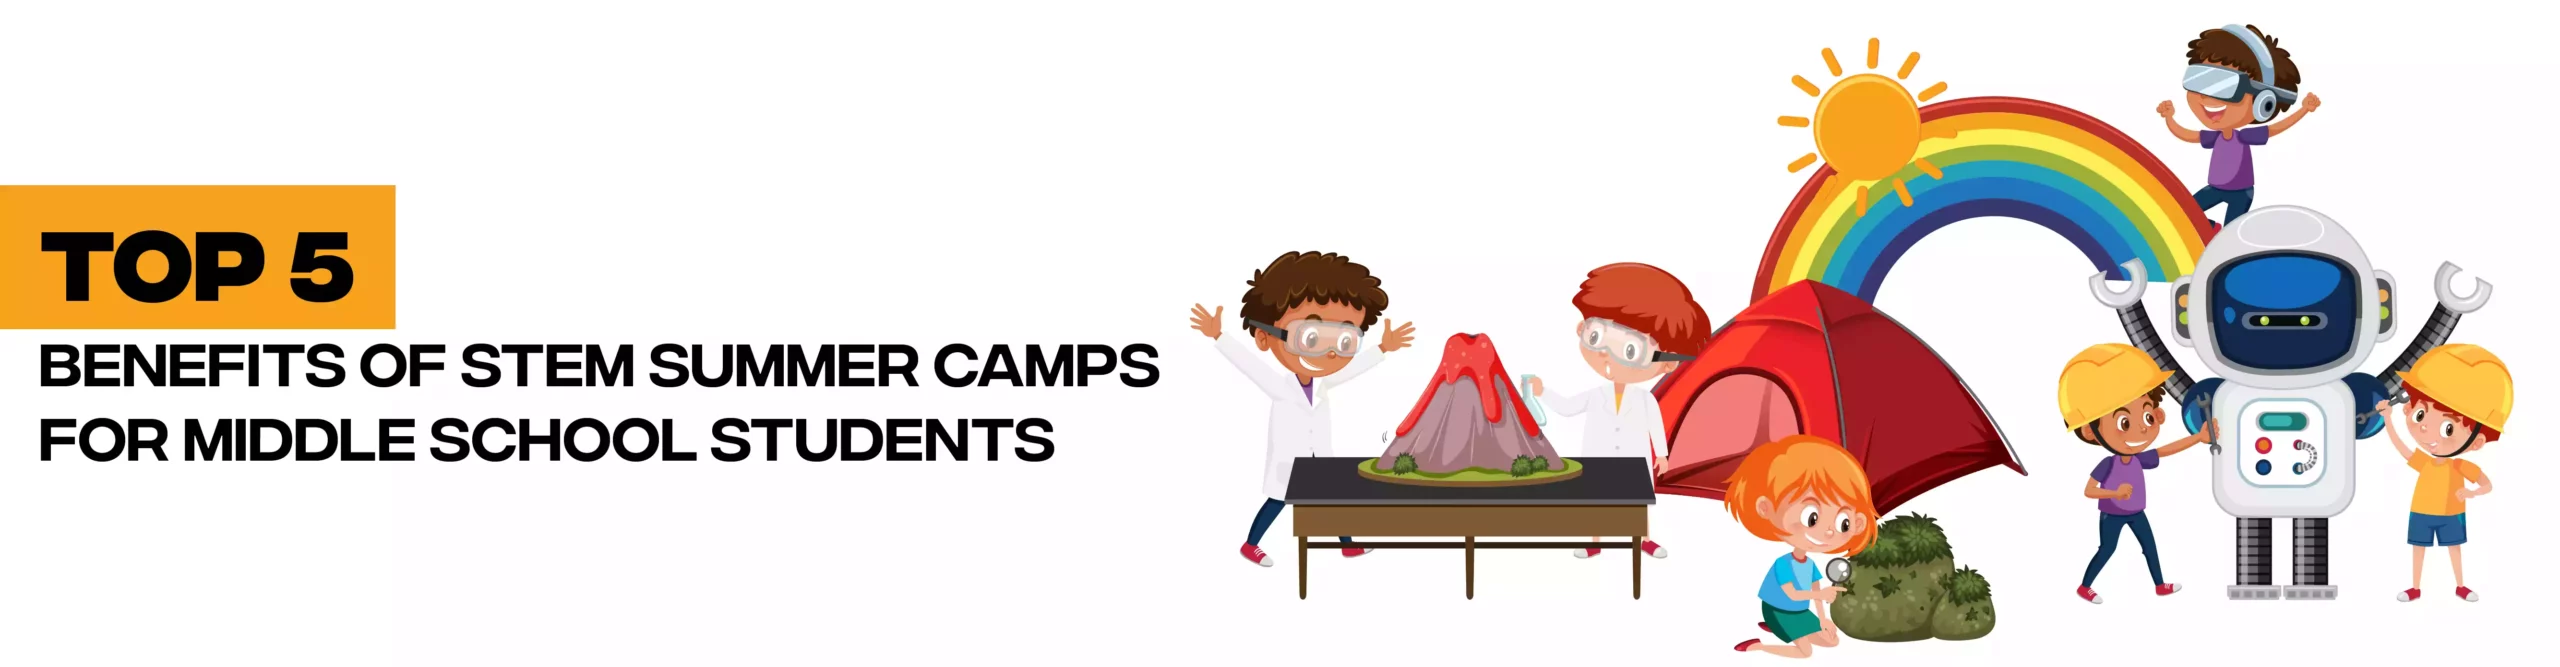 top 5 benefits of stem summer camps for middle school students